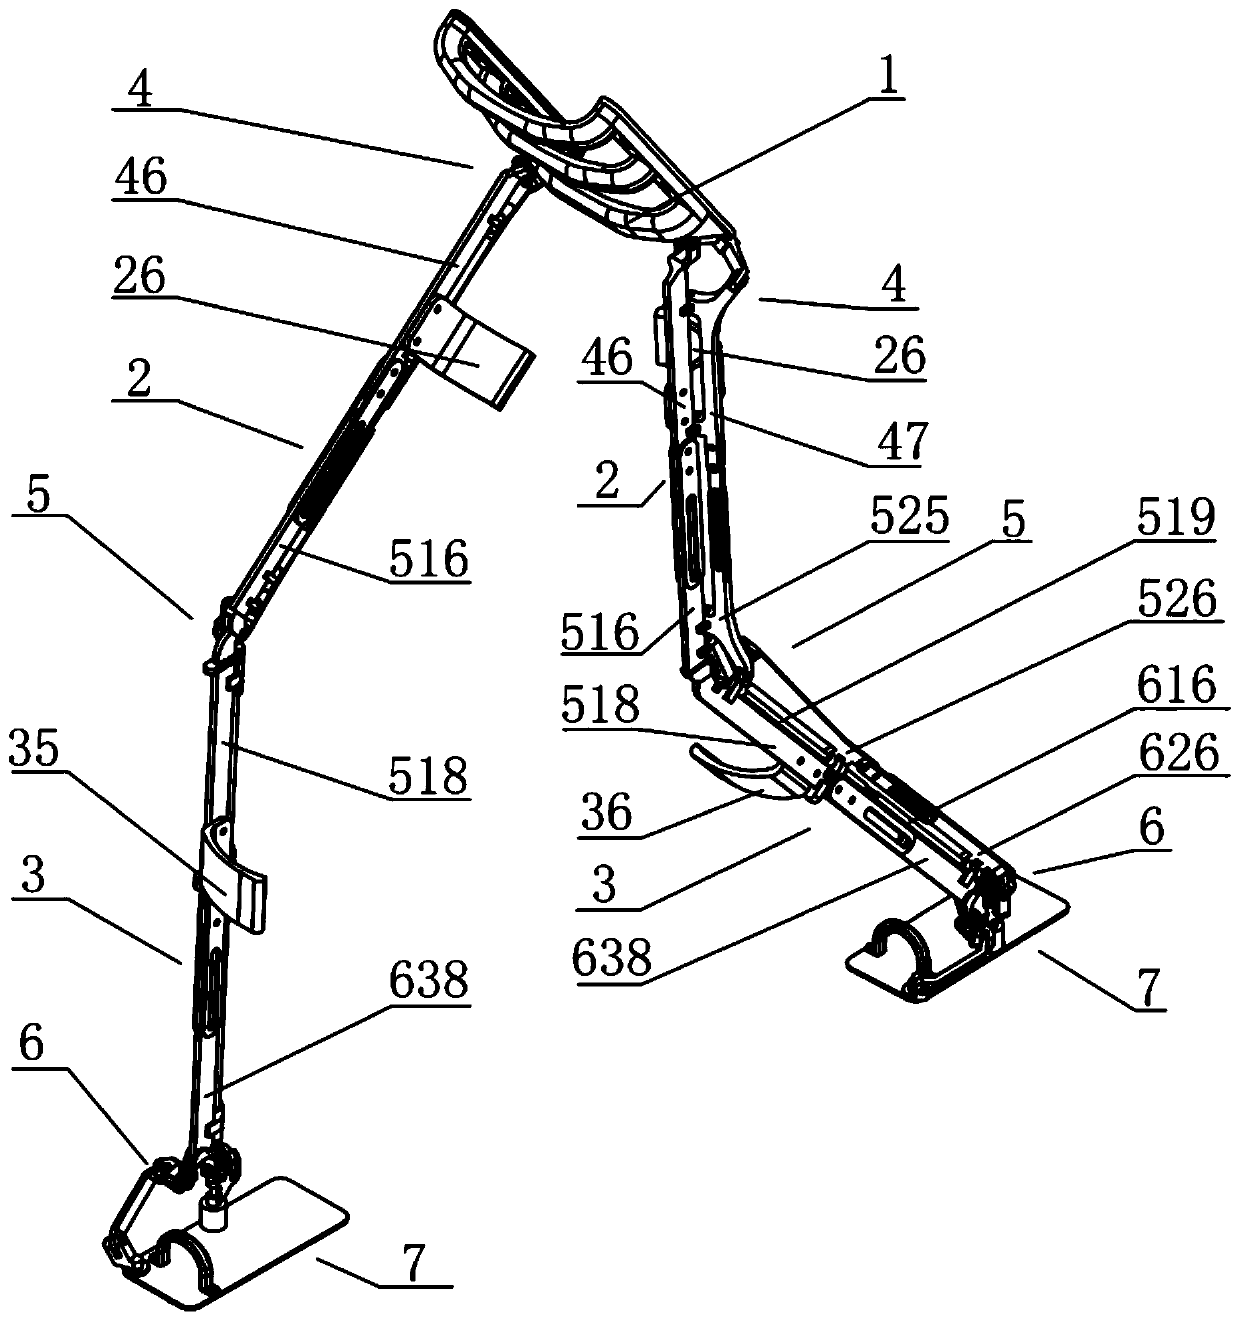 Auxiliary-supporting lower limb exoskeleton robot